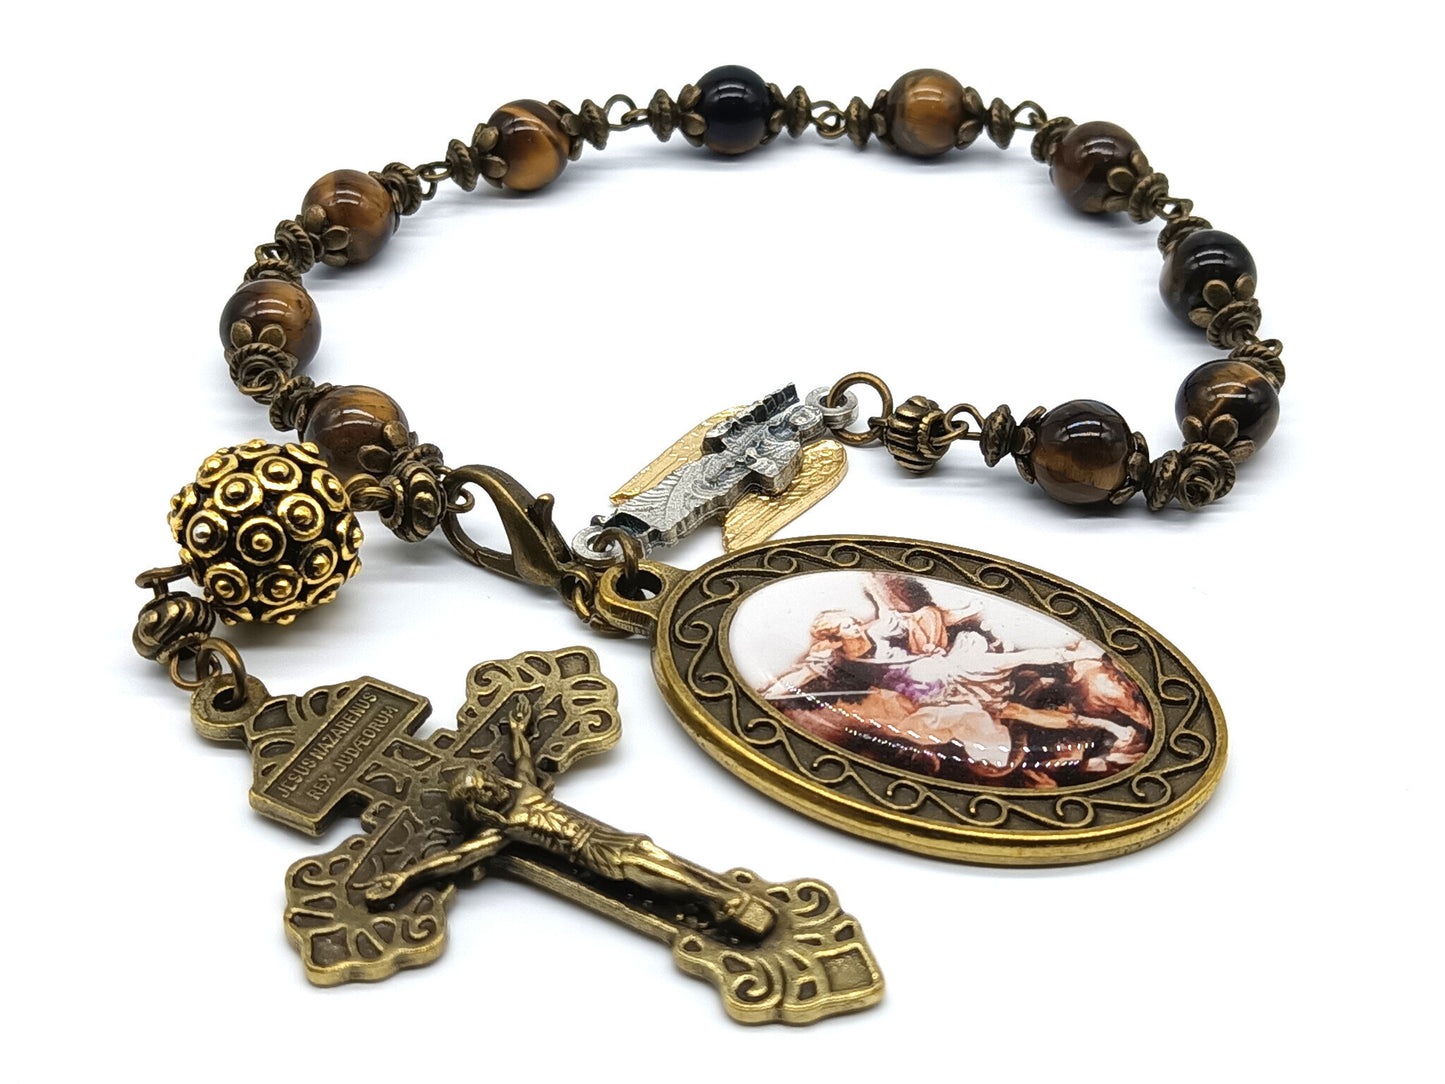 Saint Michael unique rosary beads single decade with tigers eye gemstone beads, bronze pardon crucifix, St. Michael picture medal, lobster clasp and gold pater bead.